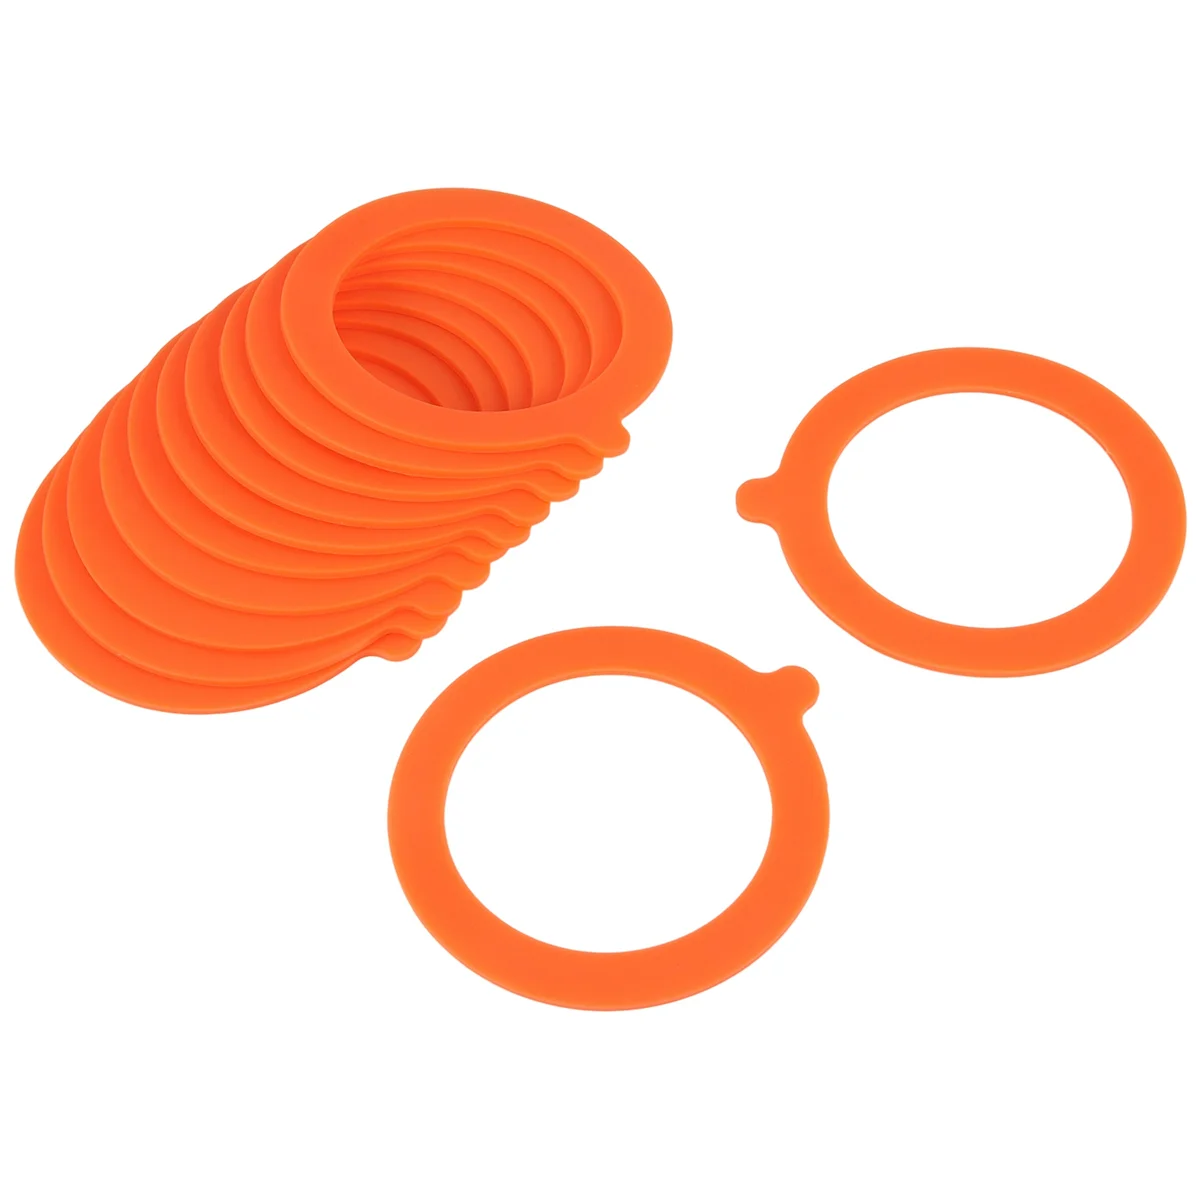 

12 Pack Silicone Replacement Gasket, Airtight Rubber Seals Rings for Mason Jar Lids, Leak-Proof Canning Silicone, Orange